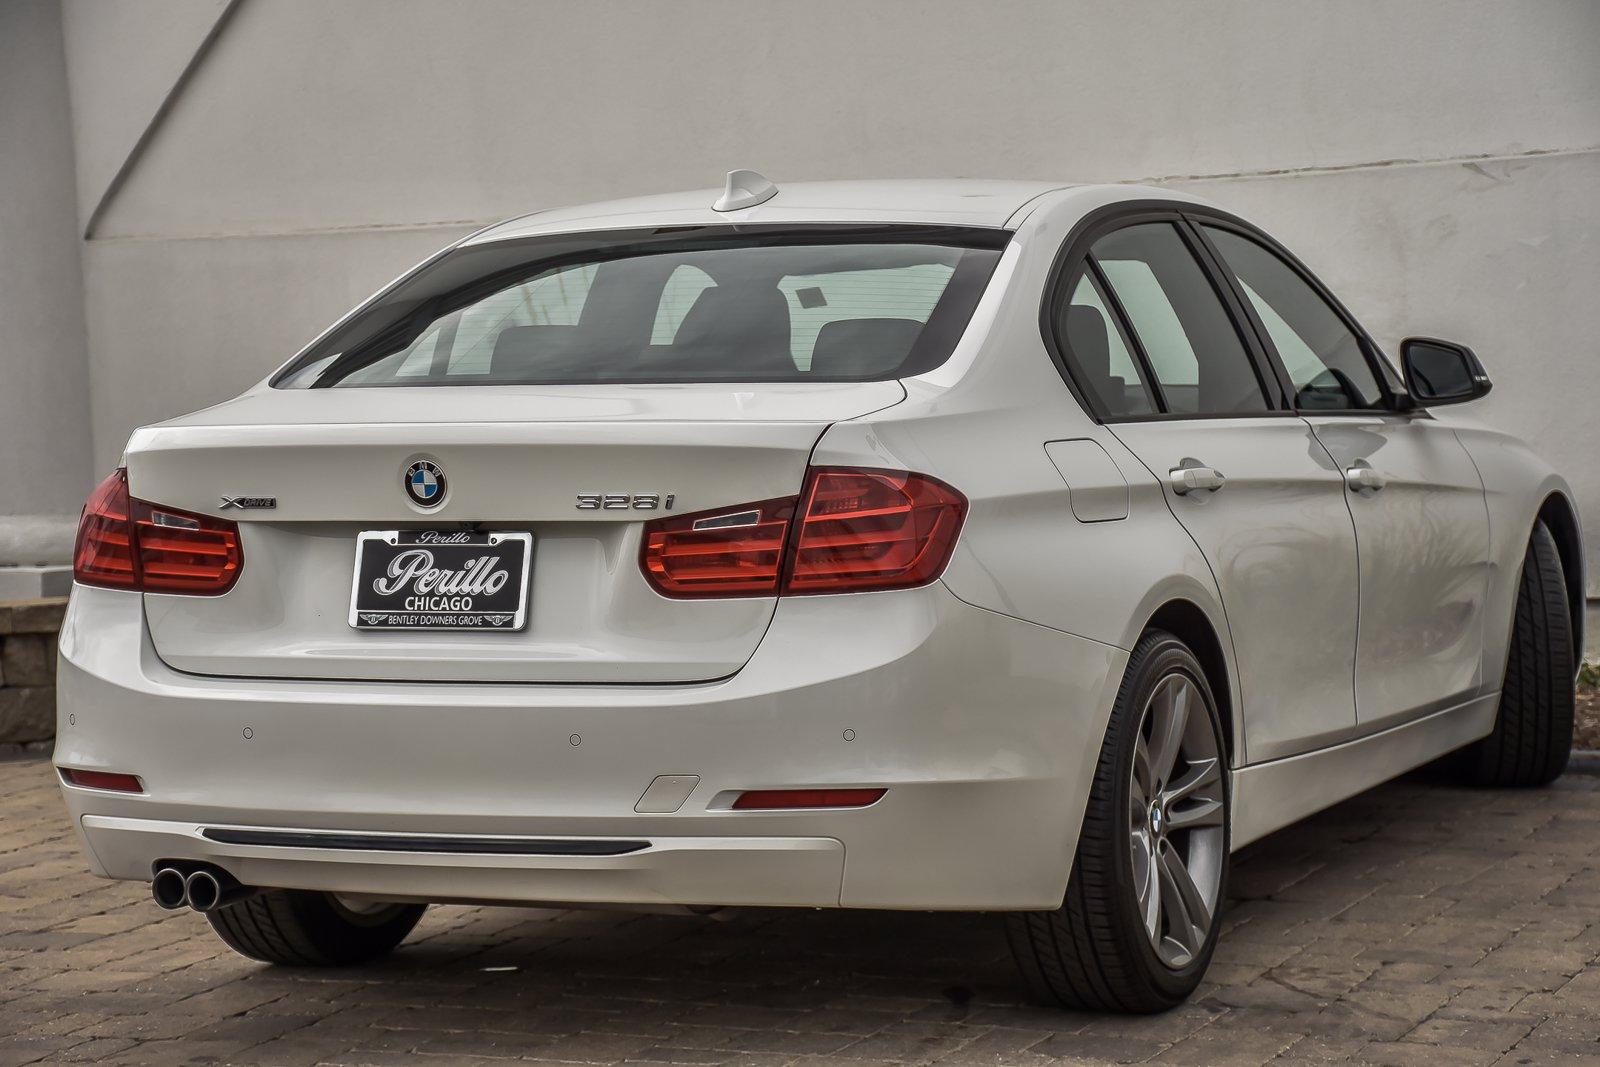 Used 2014 BMW 3 Series 328i xDrive Sport-Line With Navigation | Downers Grove, IL